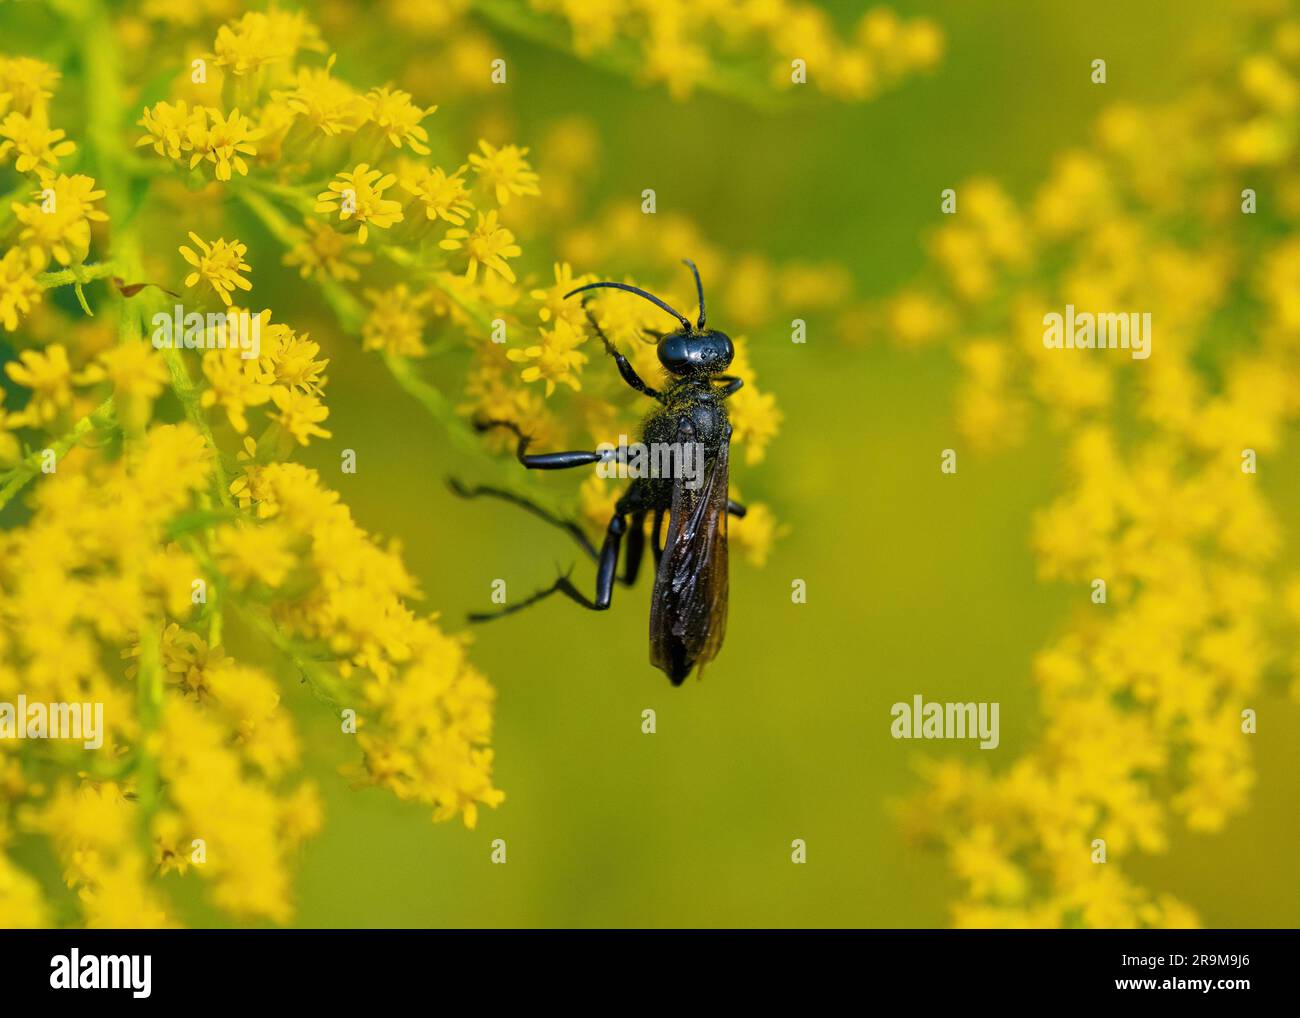 A Great Black Wasp hanging onto a Goldenrod plant while pollinating. Stock Photo